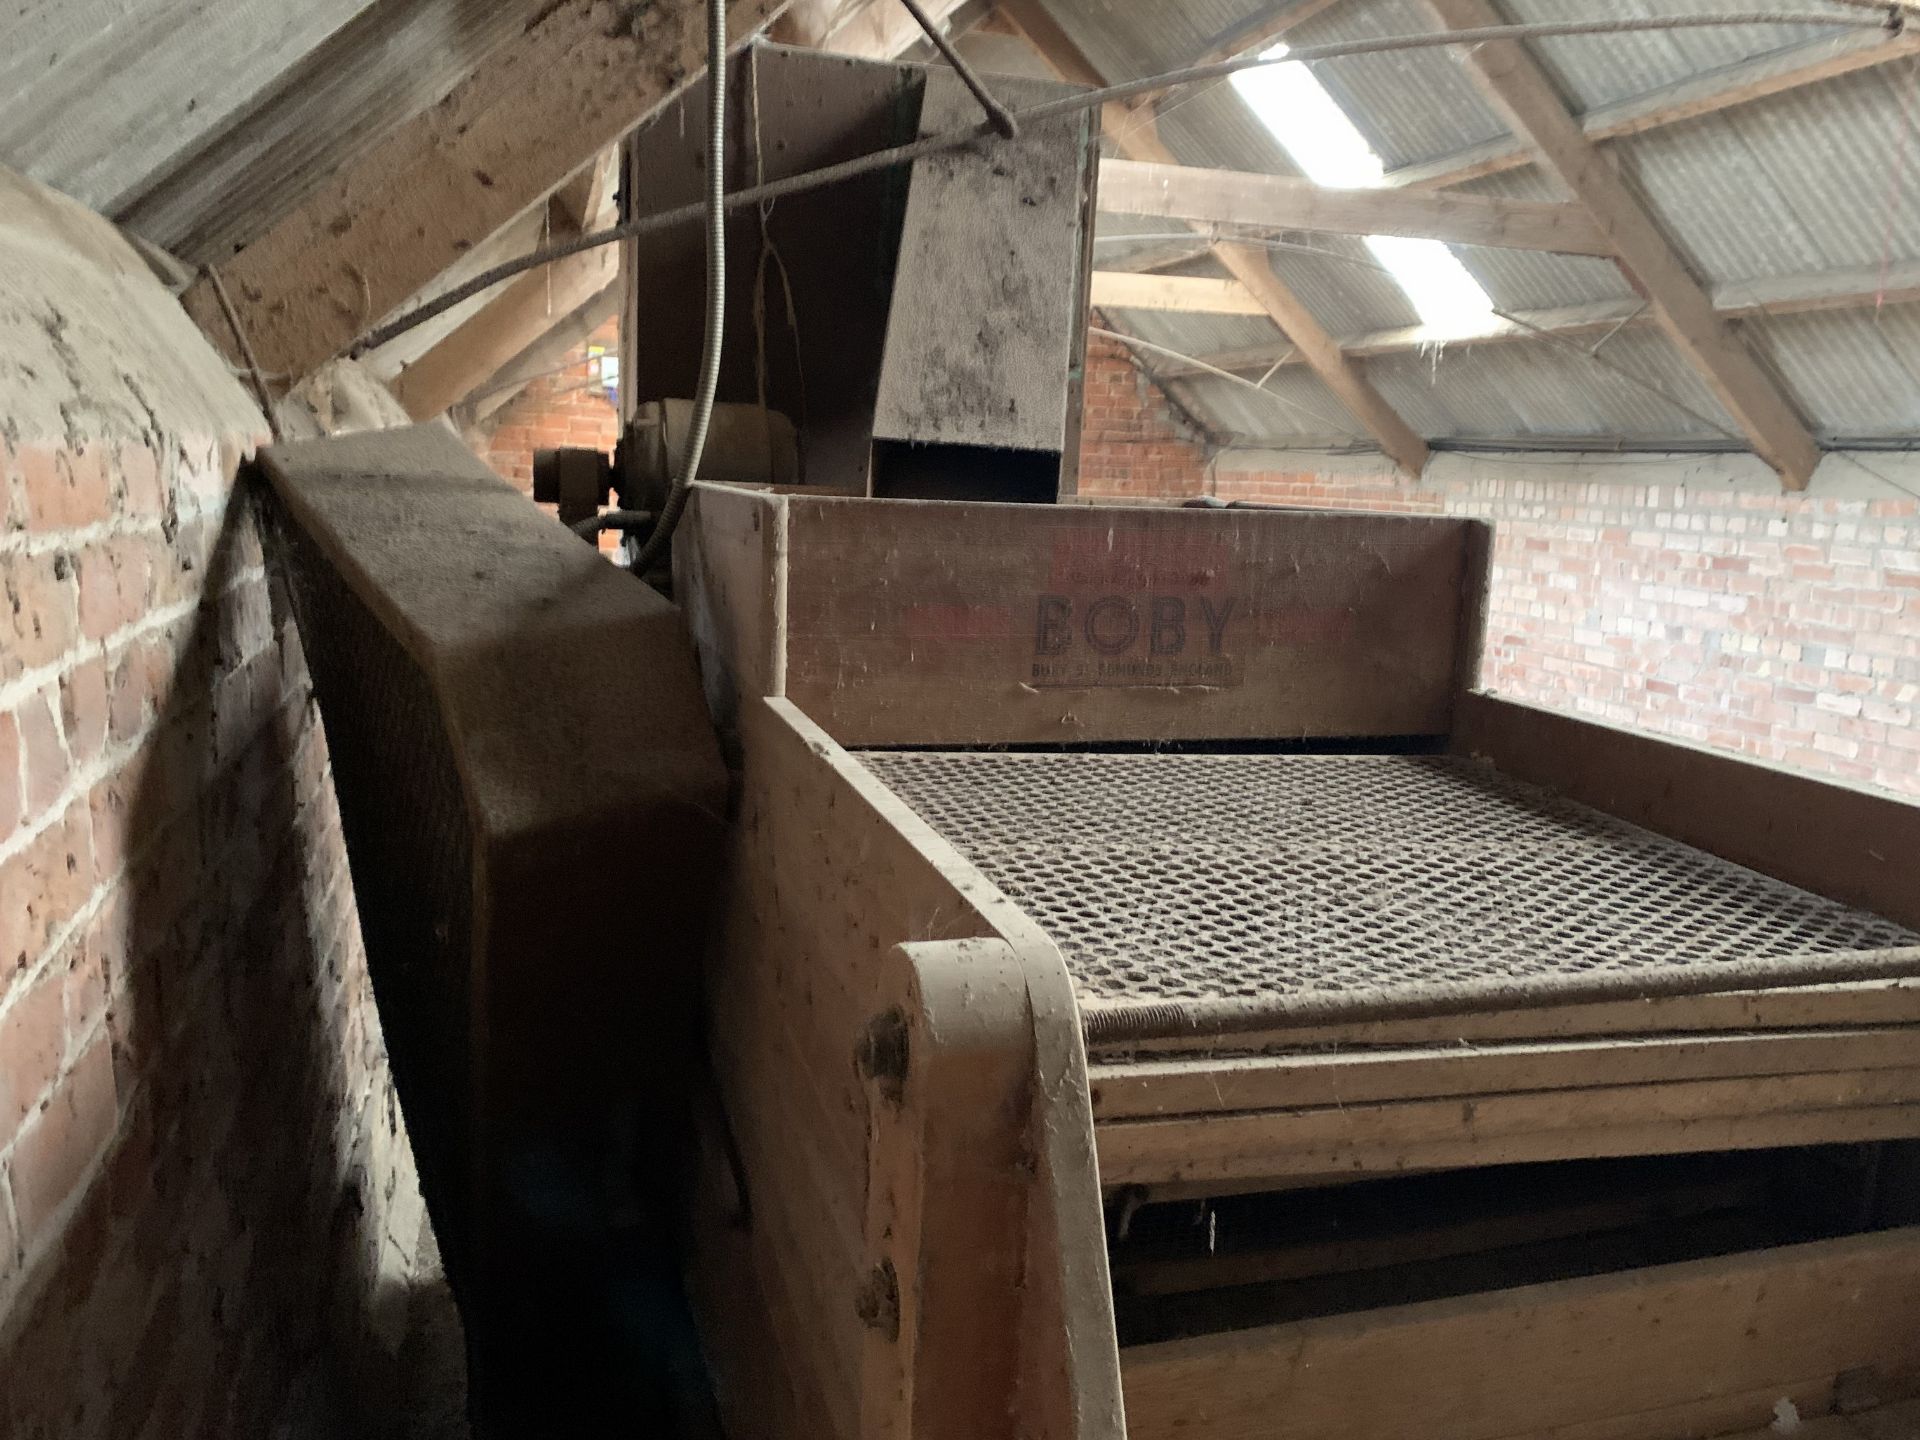 Boby seed dresser & bagging machine, on first floor of barn, purchaser to remove - Image 2 of 3